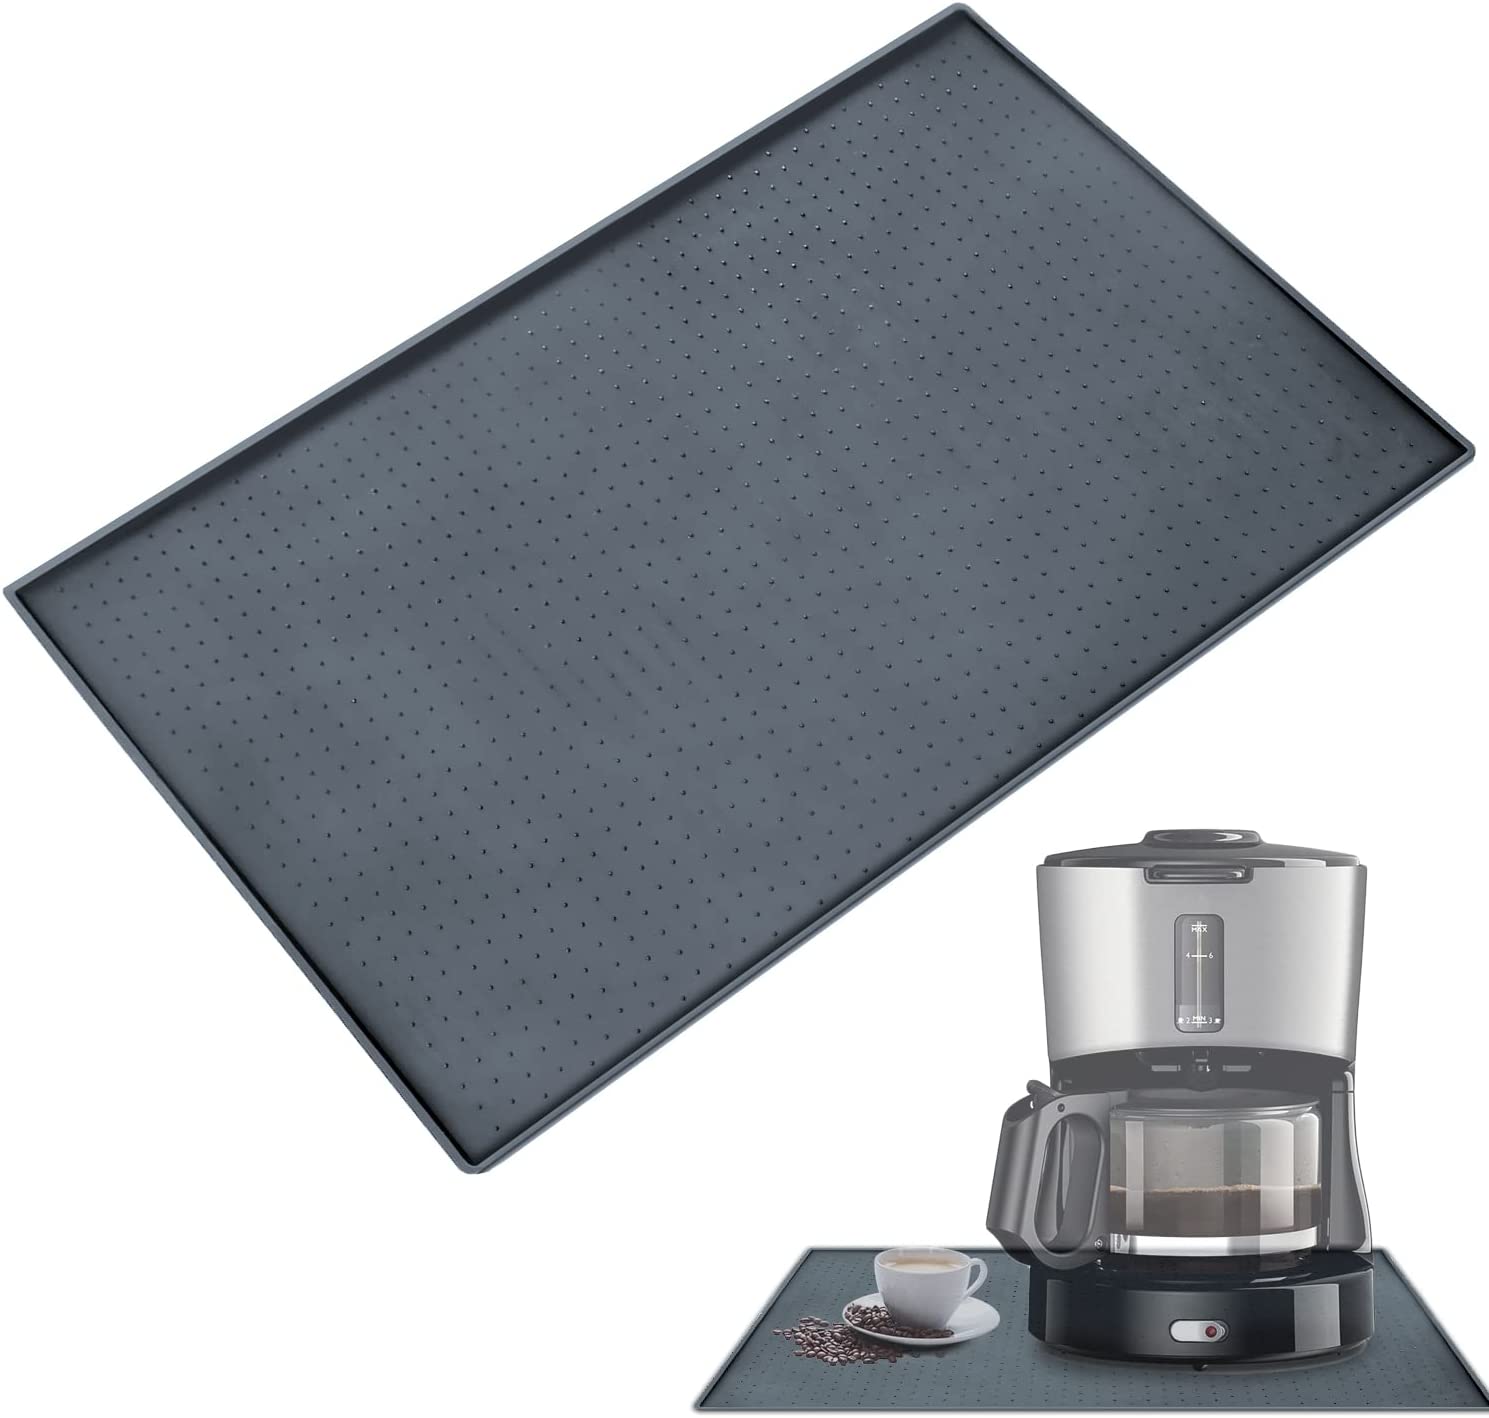 GUJIN Silicone Mat Under Coffee Machine Non-Slip Mat for Fully Automatic Coffee Machine Barista Accessories with Granules Design for Stabilising the Coffee Machine and Protecting the Table Top (grey)